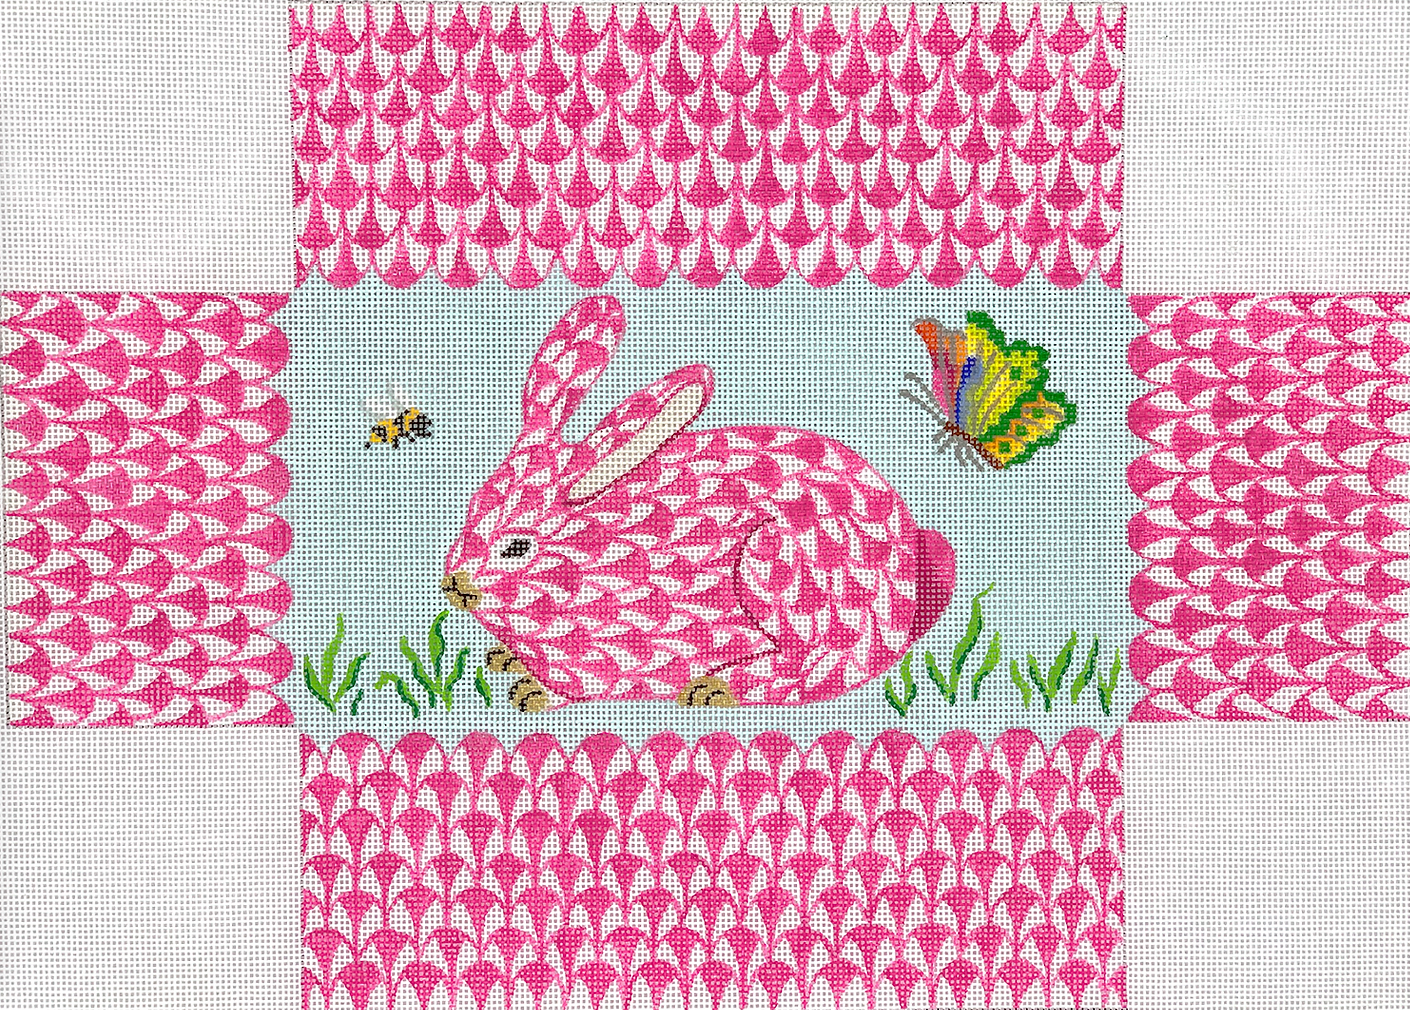 BR-33 Herend-Inspired Fishnet Pink Bunny Brick Cover